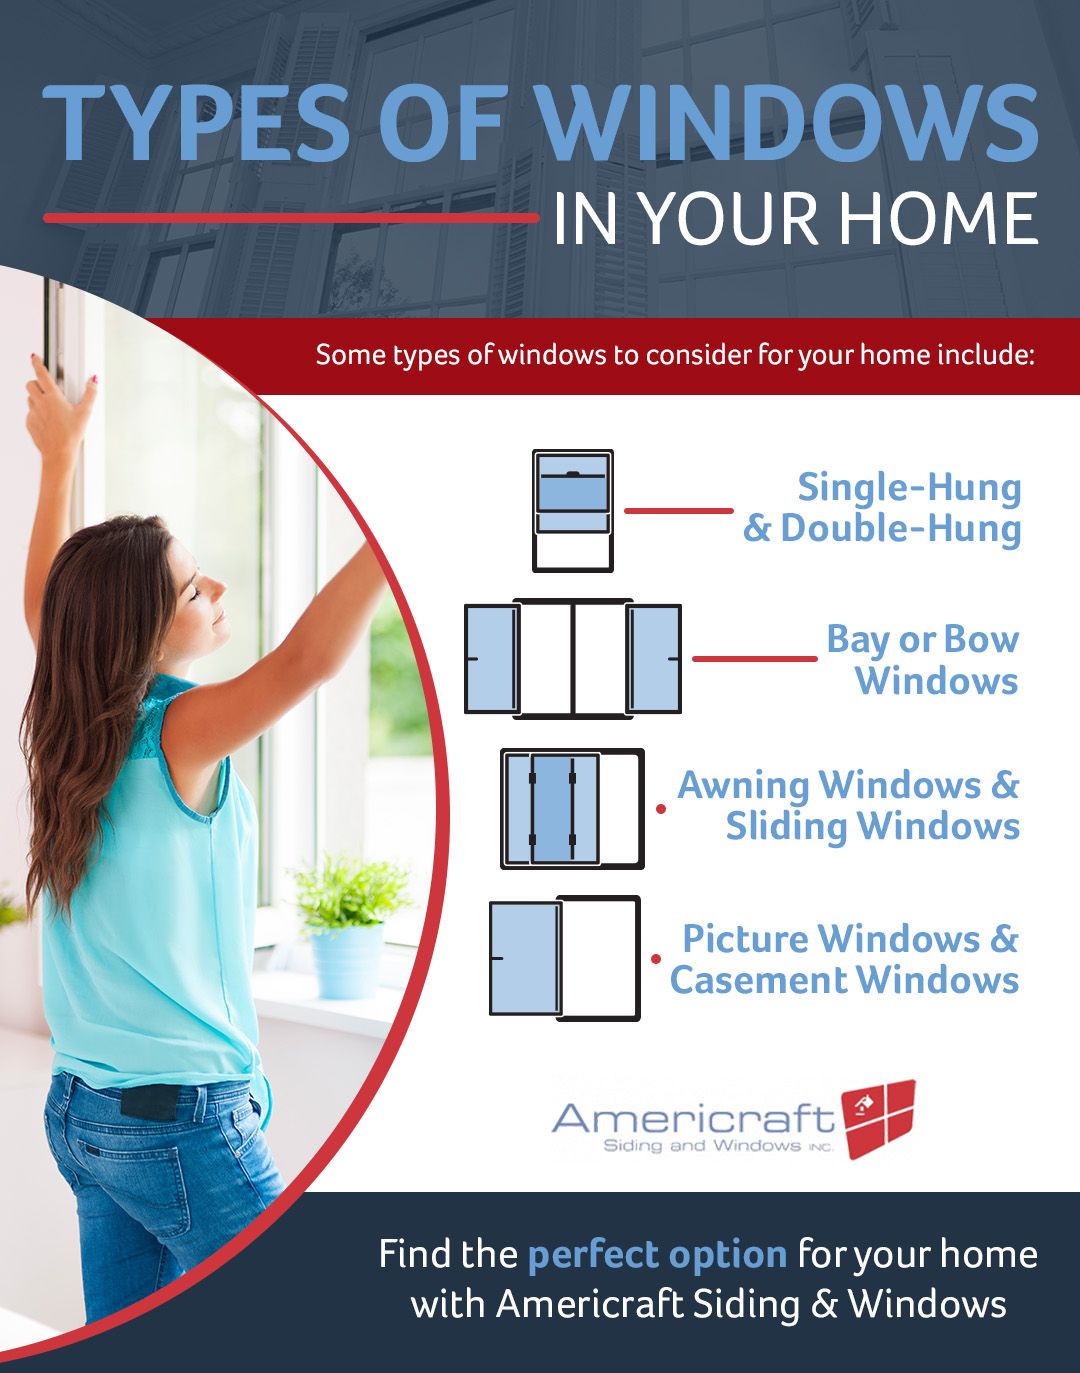 Types Of Windows In Your Home infographic.jpg